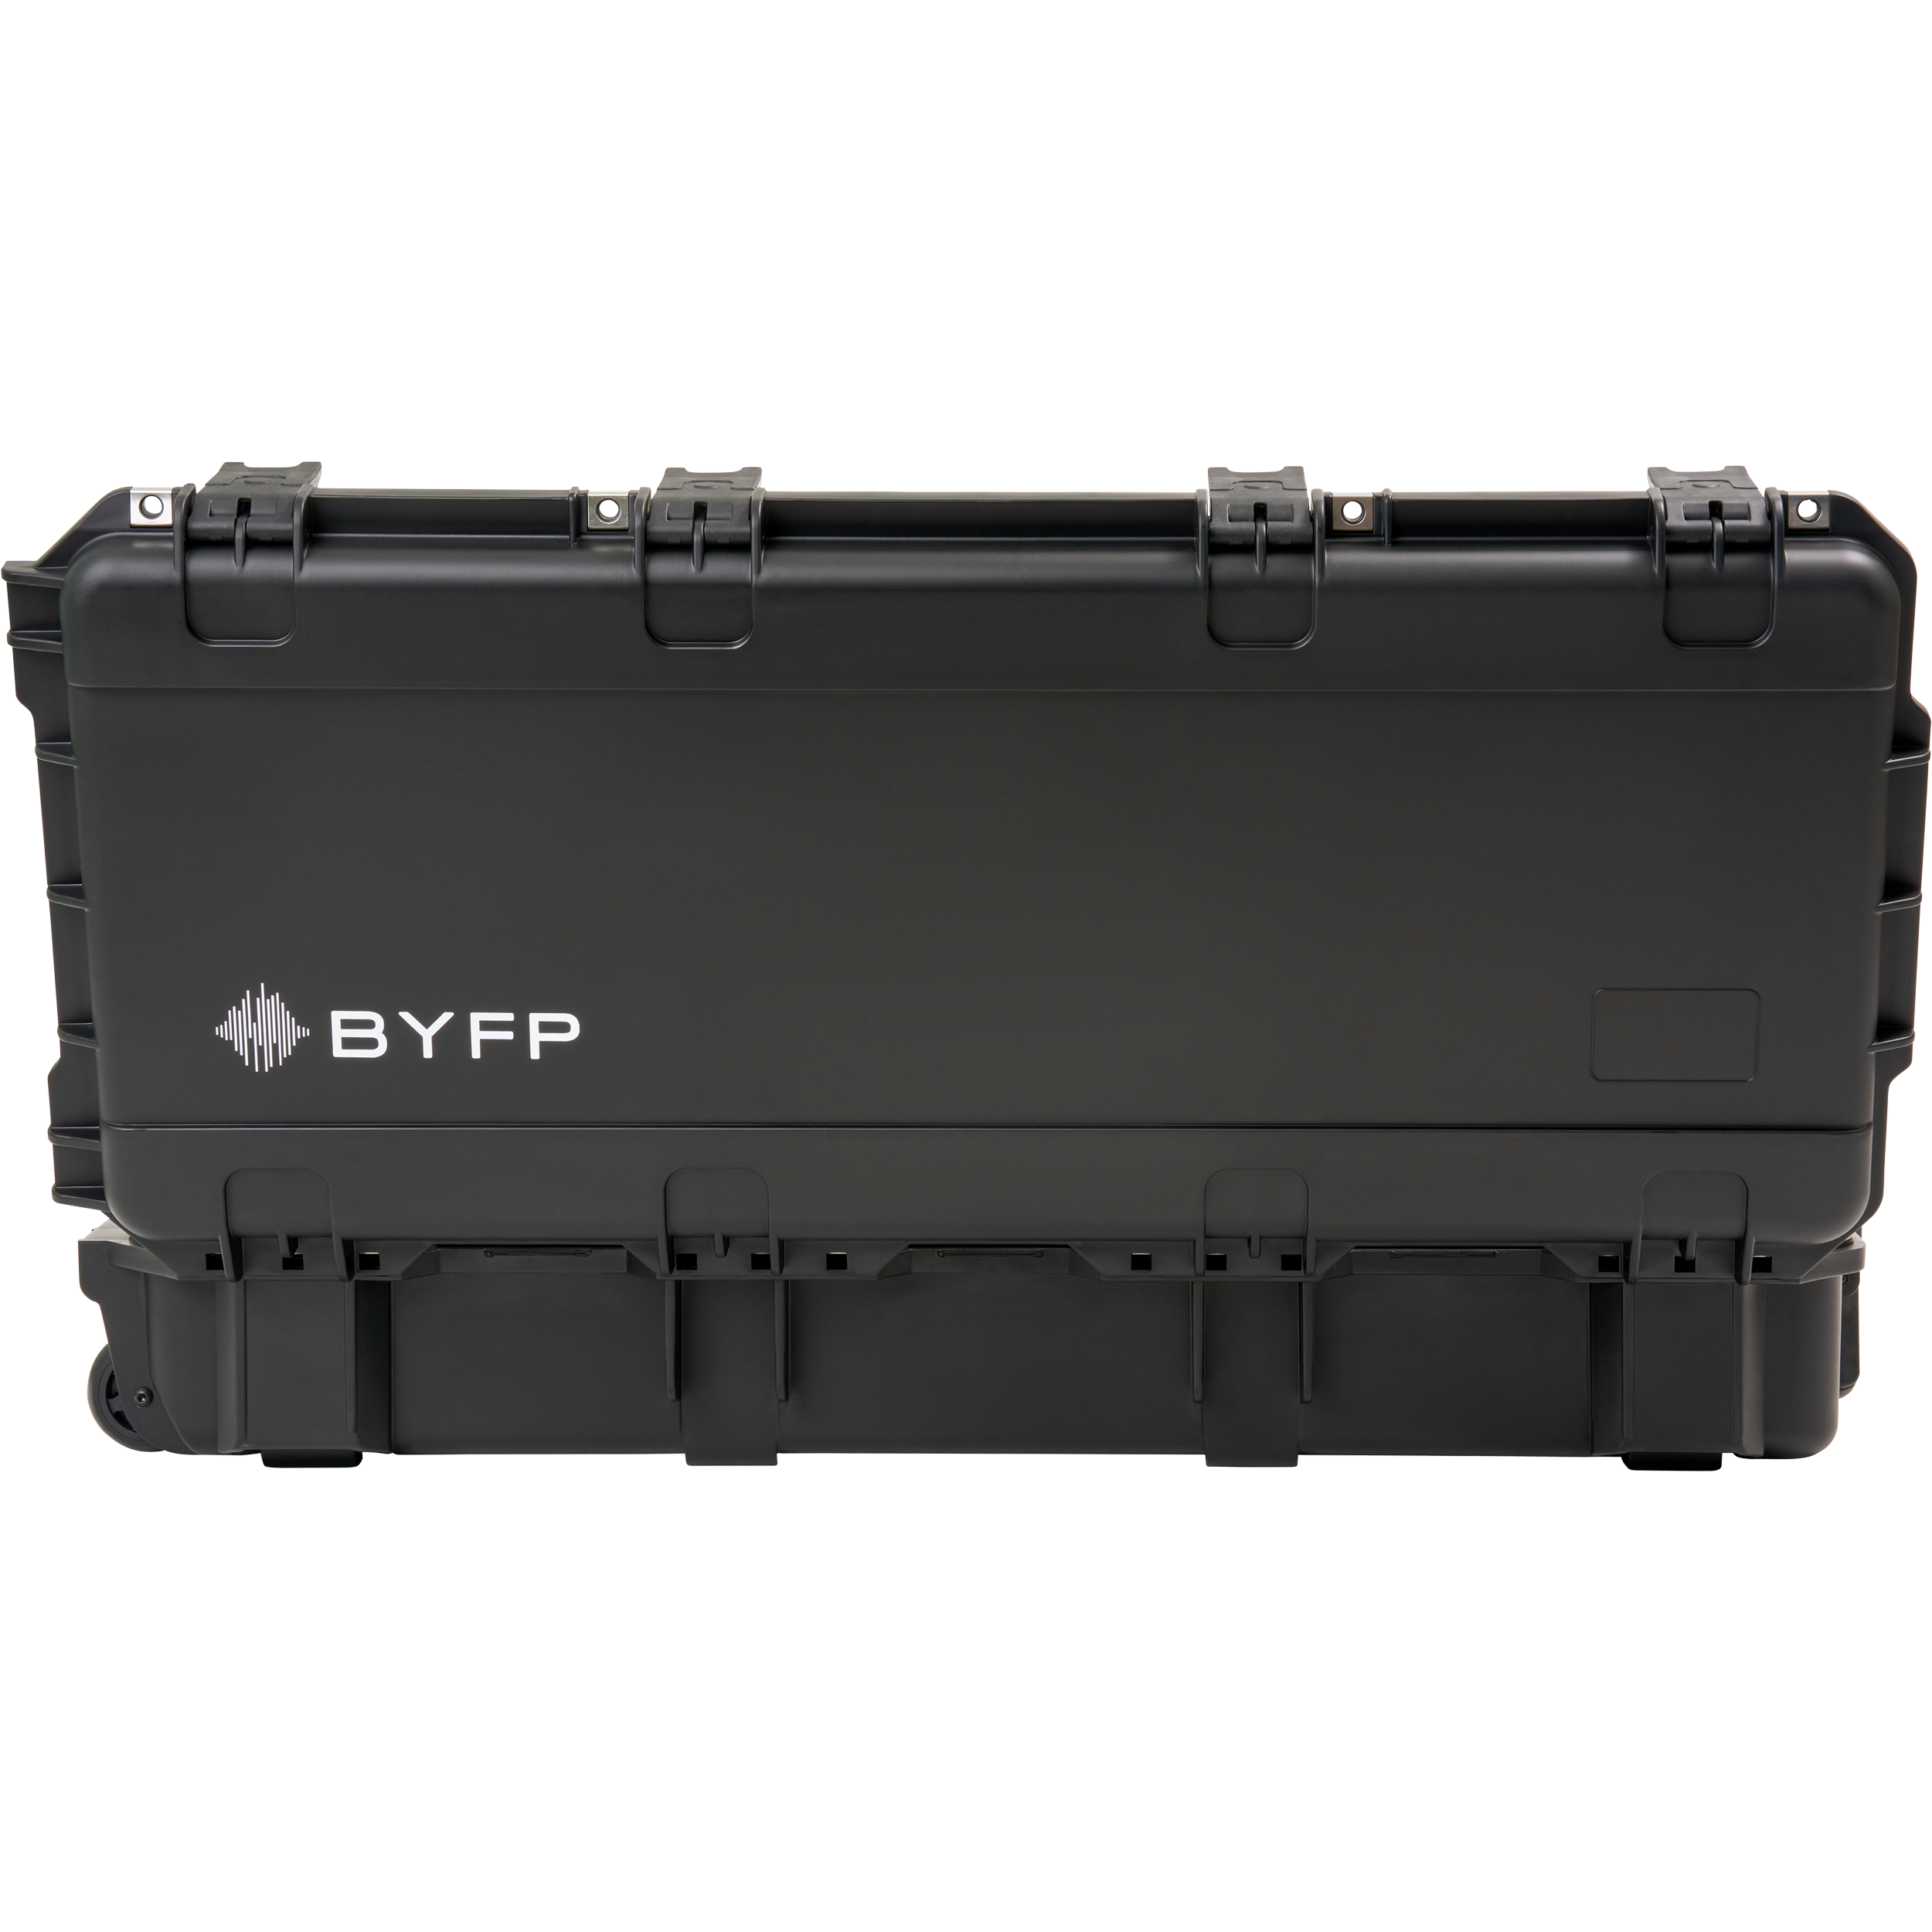 BYFP ipCase for Obsidian NX1 and NXK Controller